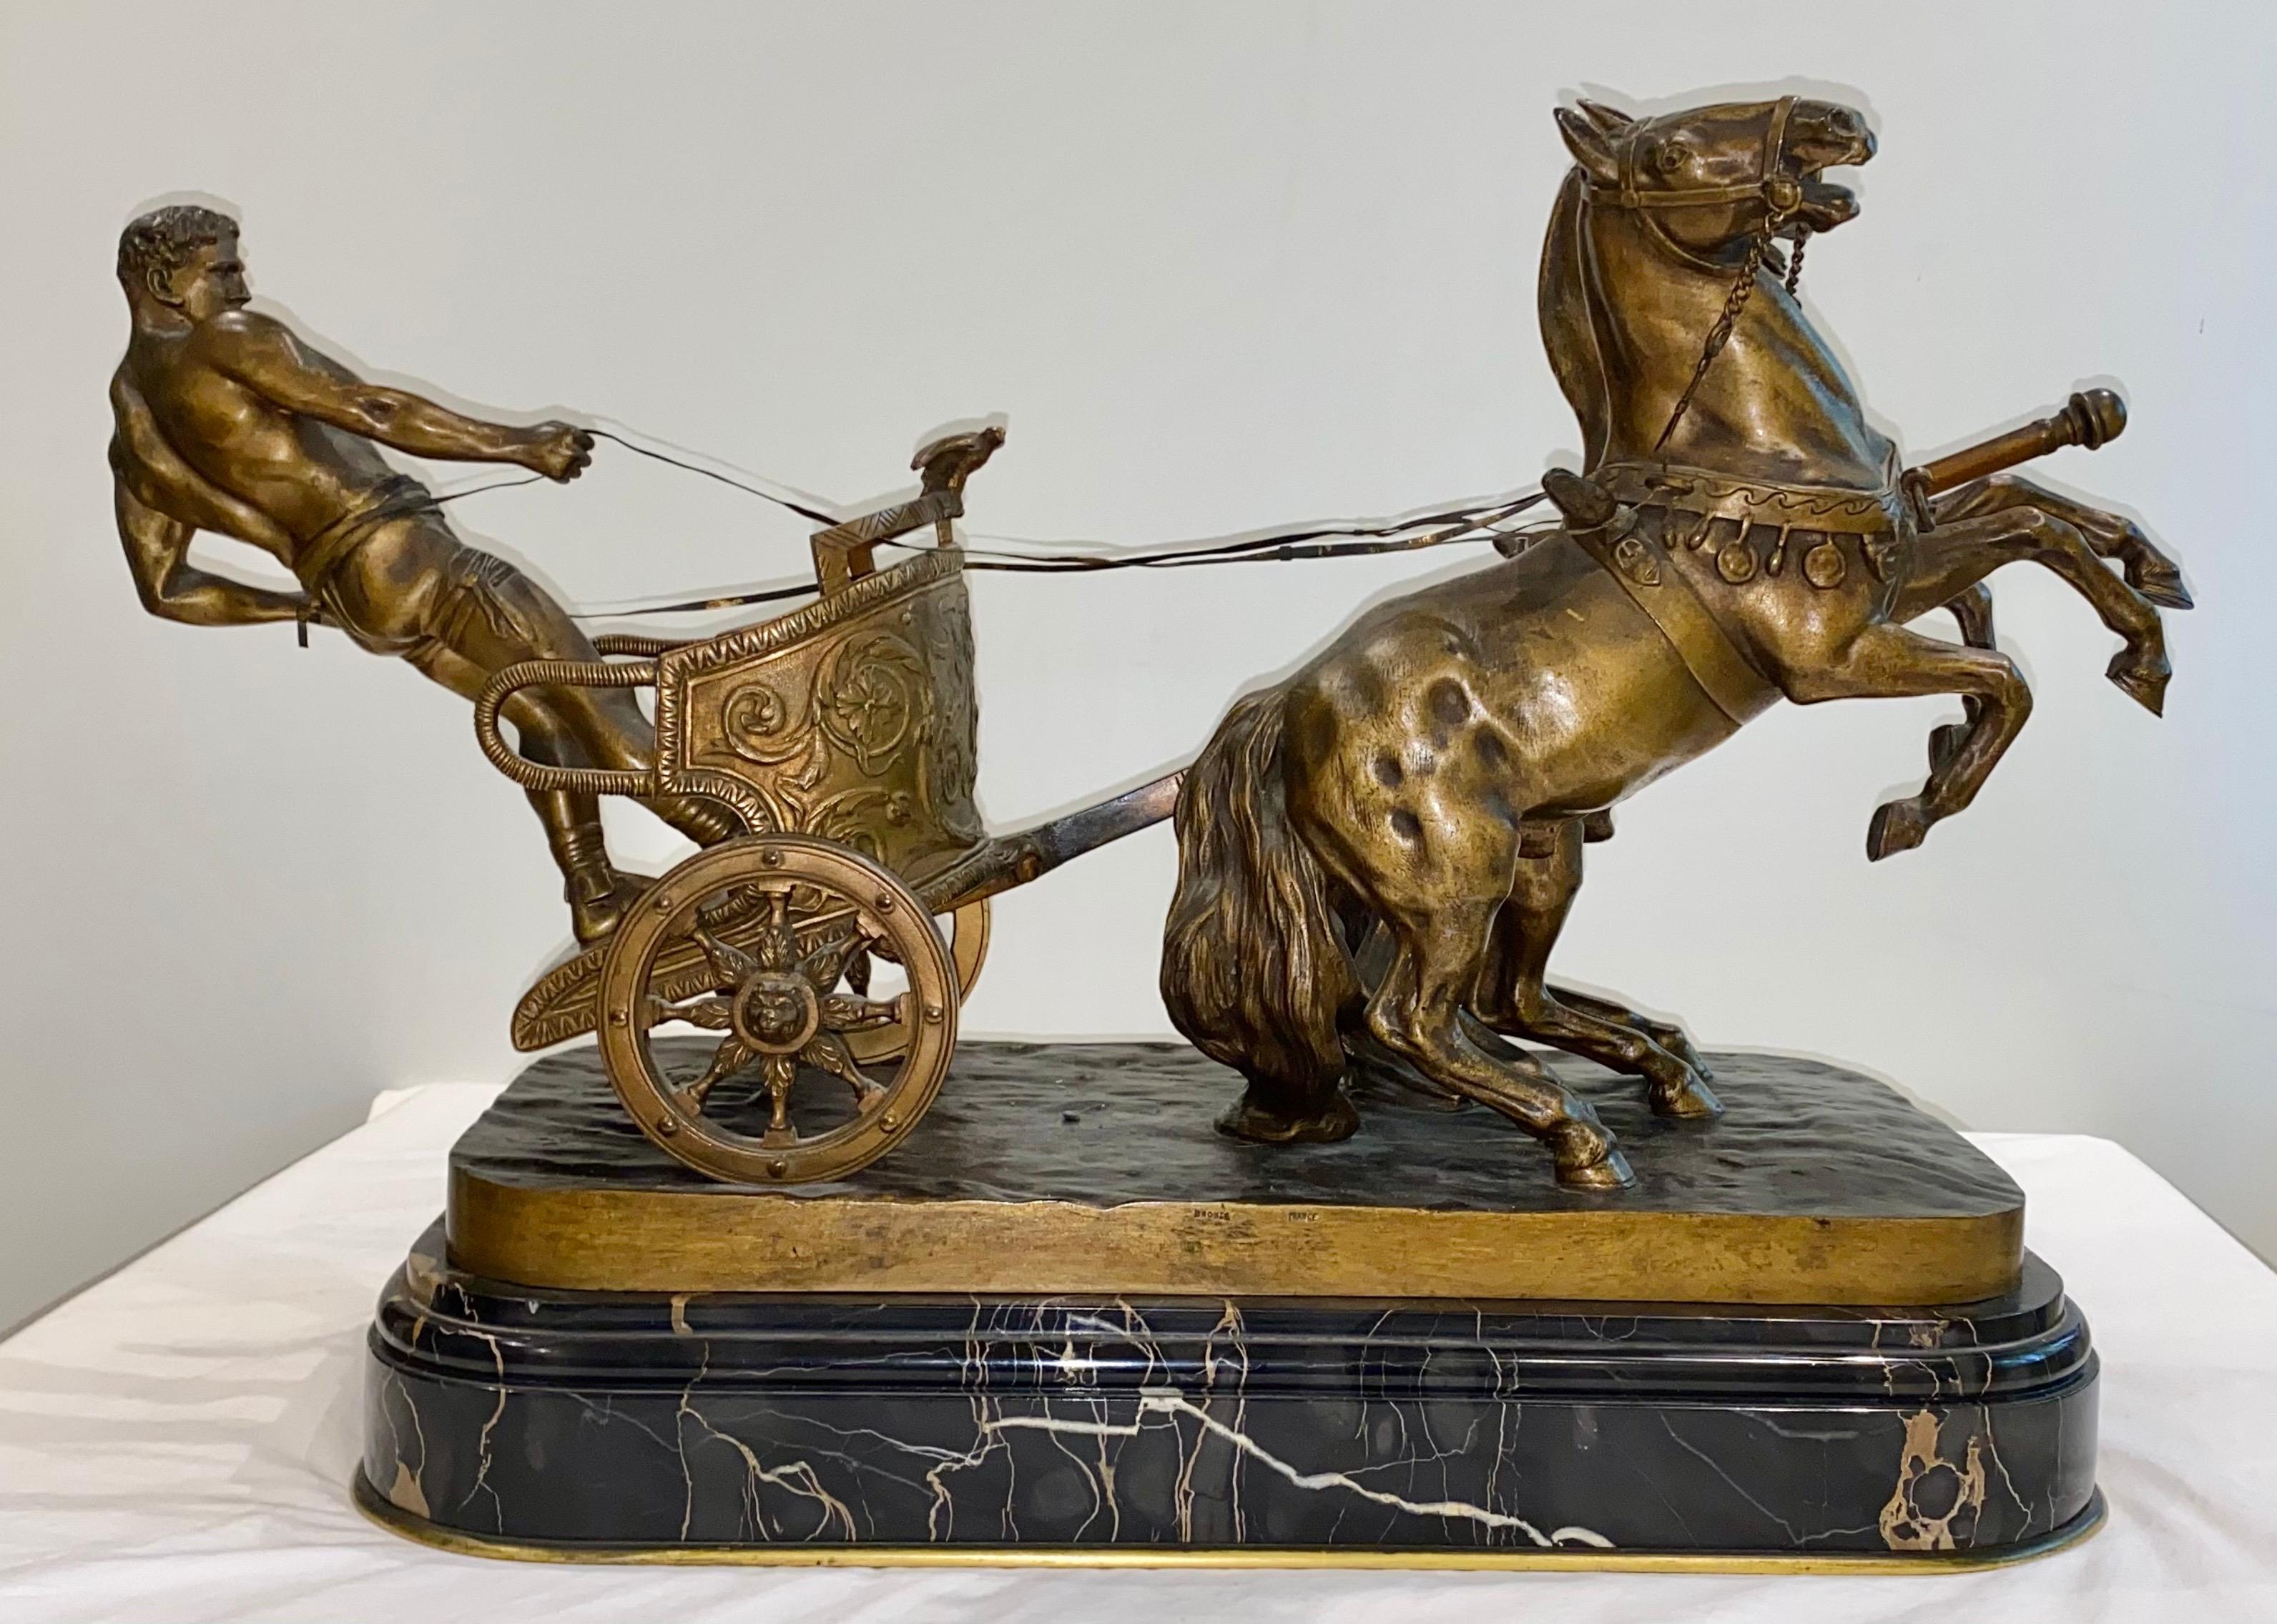 Arthur Strasser (1854-1927, Austrian) bronze group of a Roman Charioteer. The powerful scene has two horses rearing back, the man is standing at the back of the chariot holding the reins; the chariot has nice detail including scrolling leaf work on